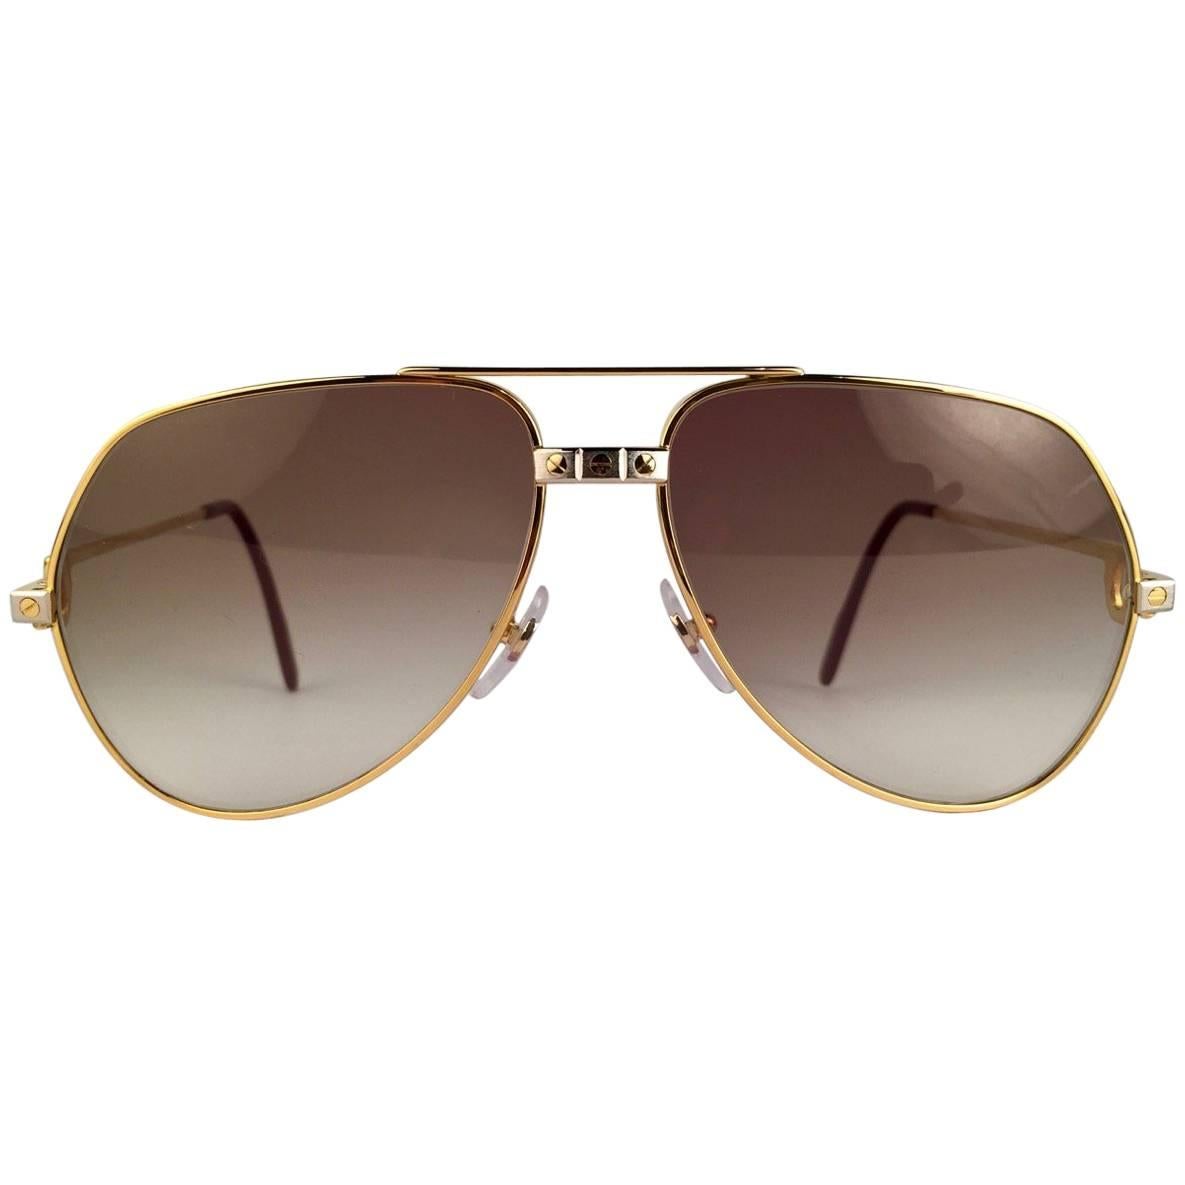 New from 1983!!! Cartier Aviator Santos Sunglasses with Brown Gradient (uv protection) Lenses.  Frame is with the famous screws on the front and sides in yellow and white gold. All hallmarks. Red enamel with Cartier gold signs on the ear paddles. 